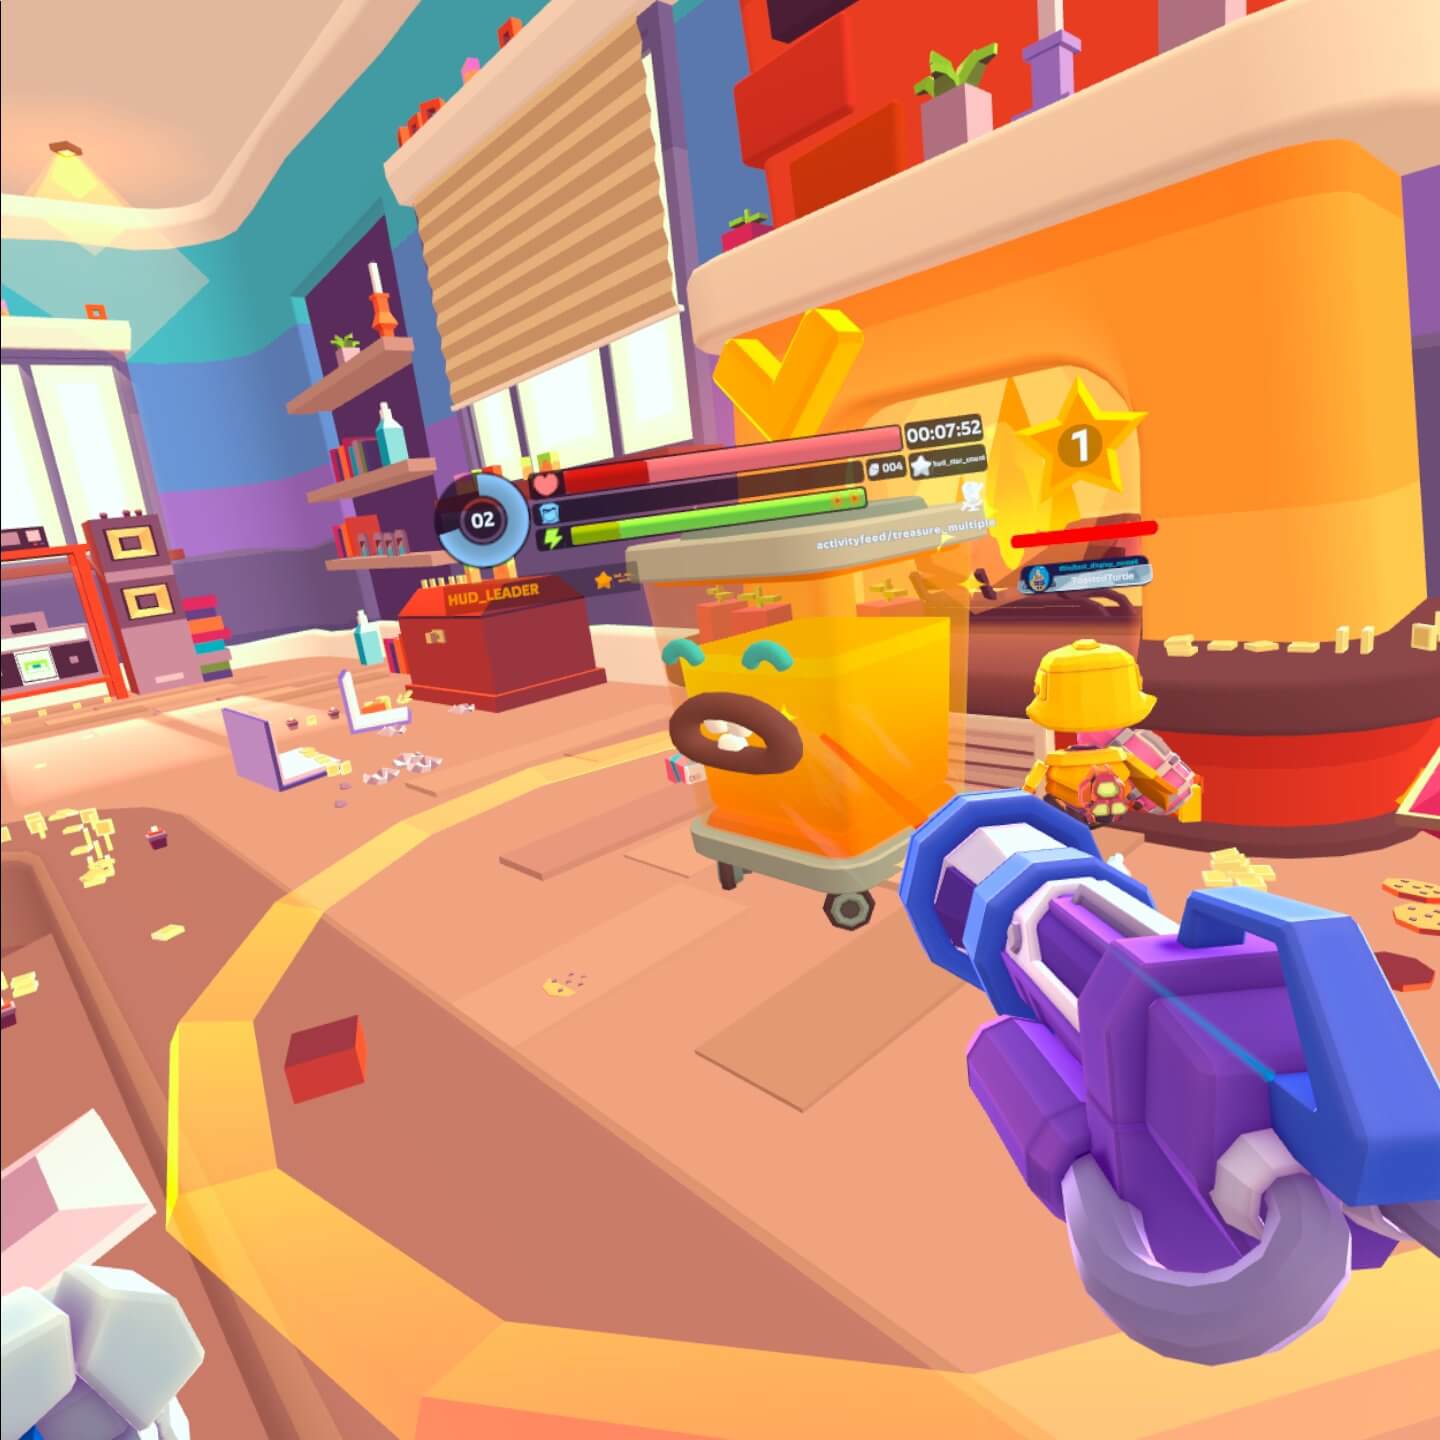 Screenshot of gameplay from the VR game Suck It. It is in a bright colourful living room, and the player is standing in front of a yellow bin with googly eyes and a mouth.